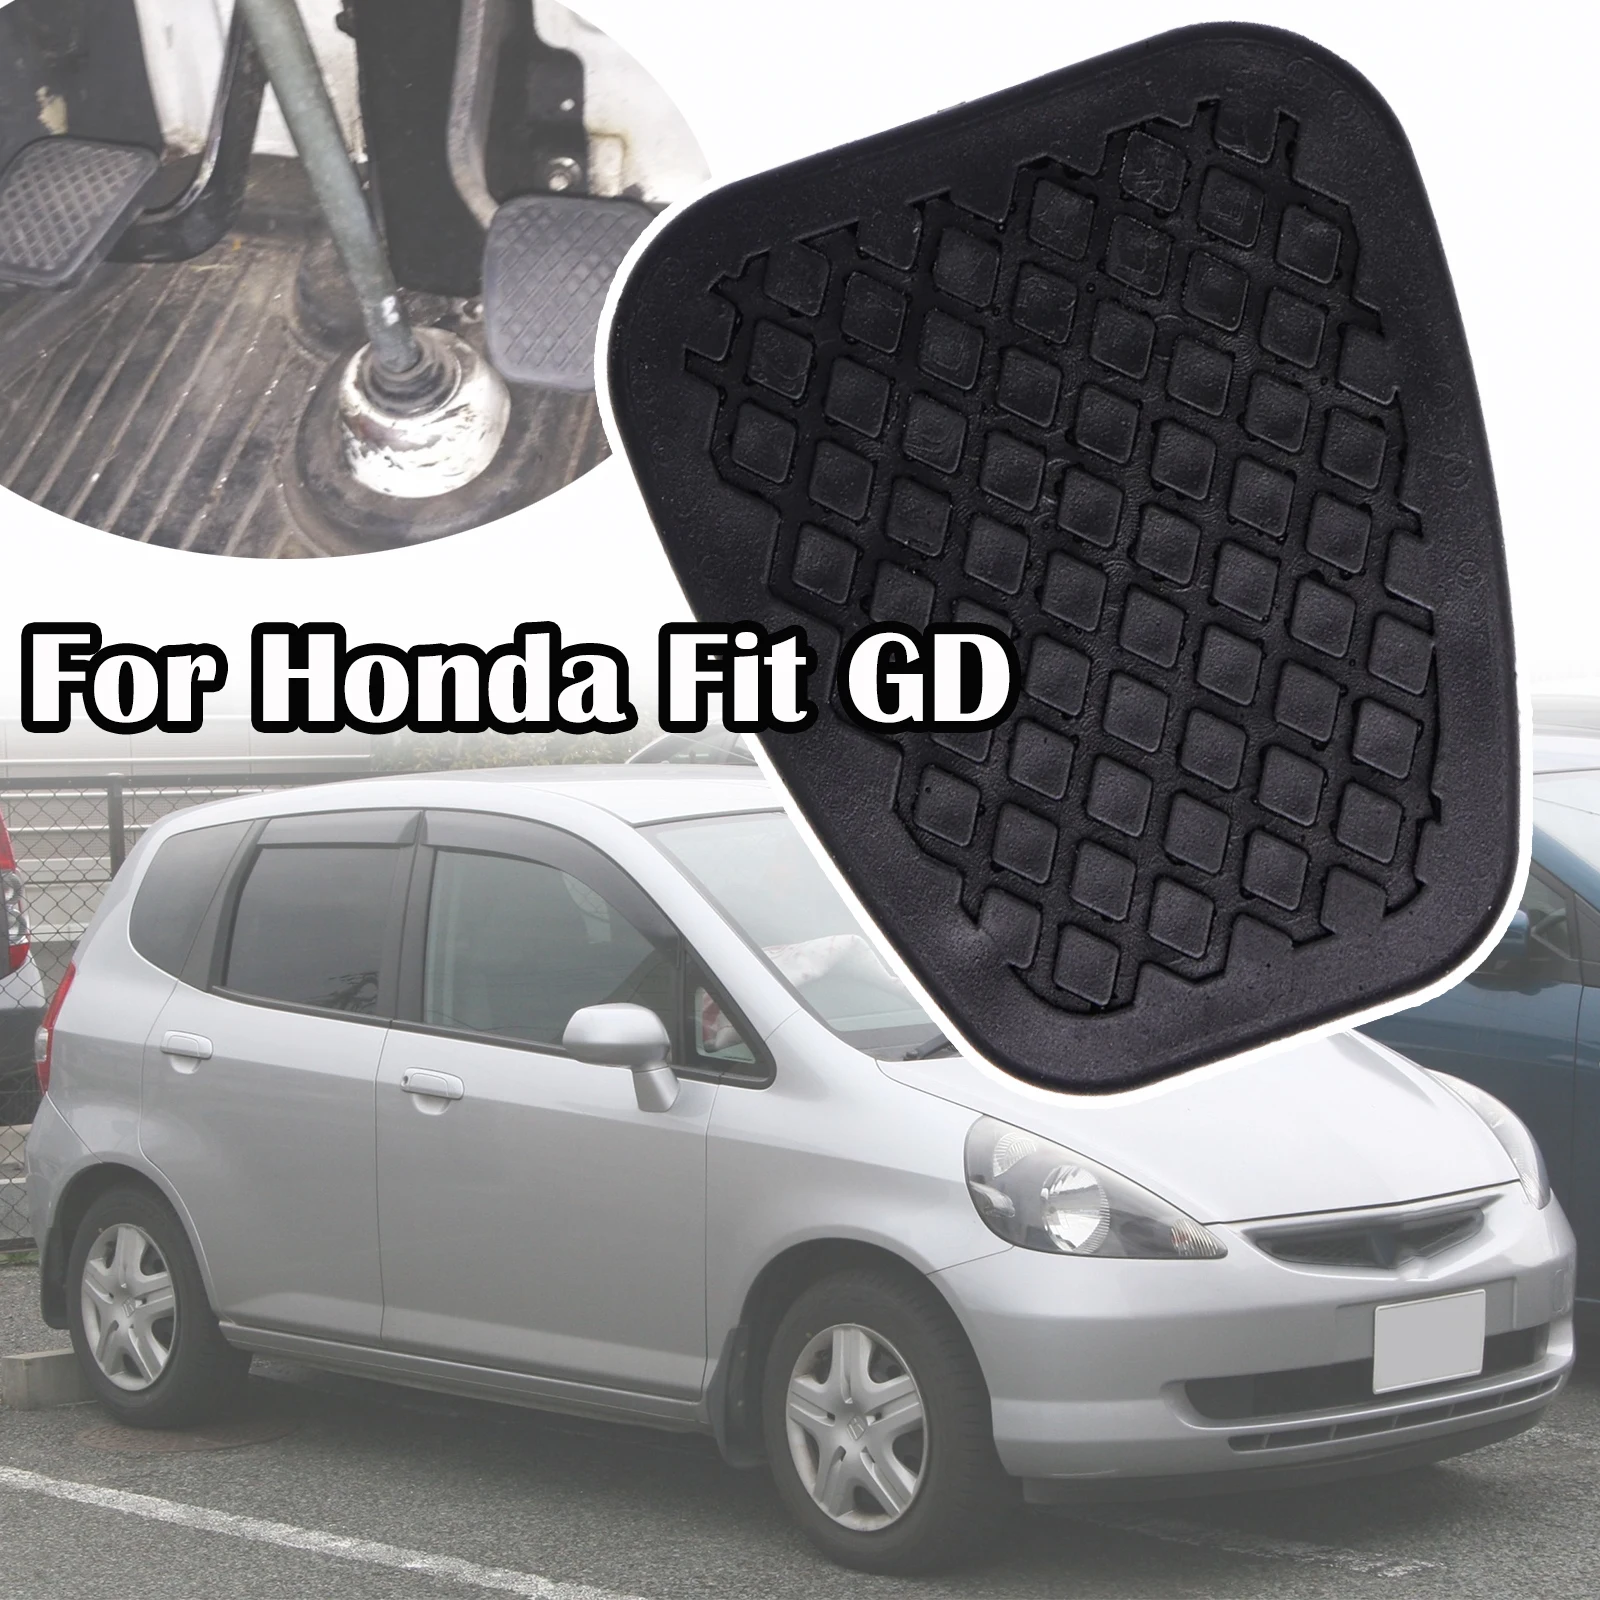 Car brake clutch foot pedal pad cover replacement for honda fit gd1 2 3 4 5 thumb200